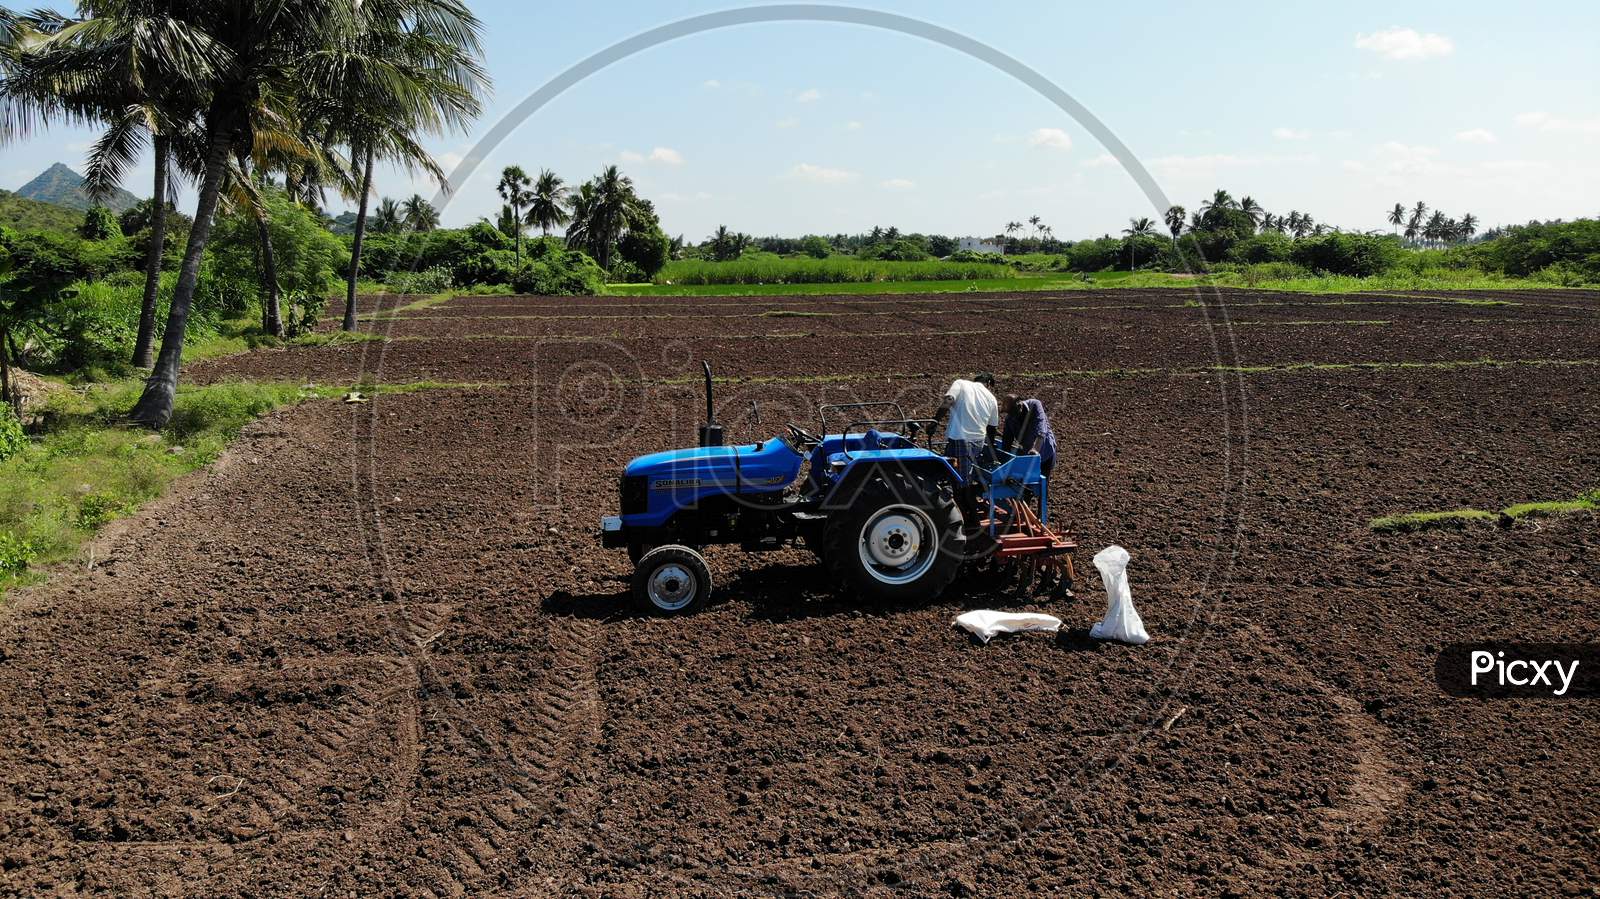 A Farmer Ploughing Agricultural Land With Tractor